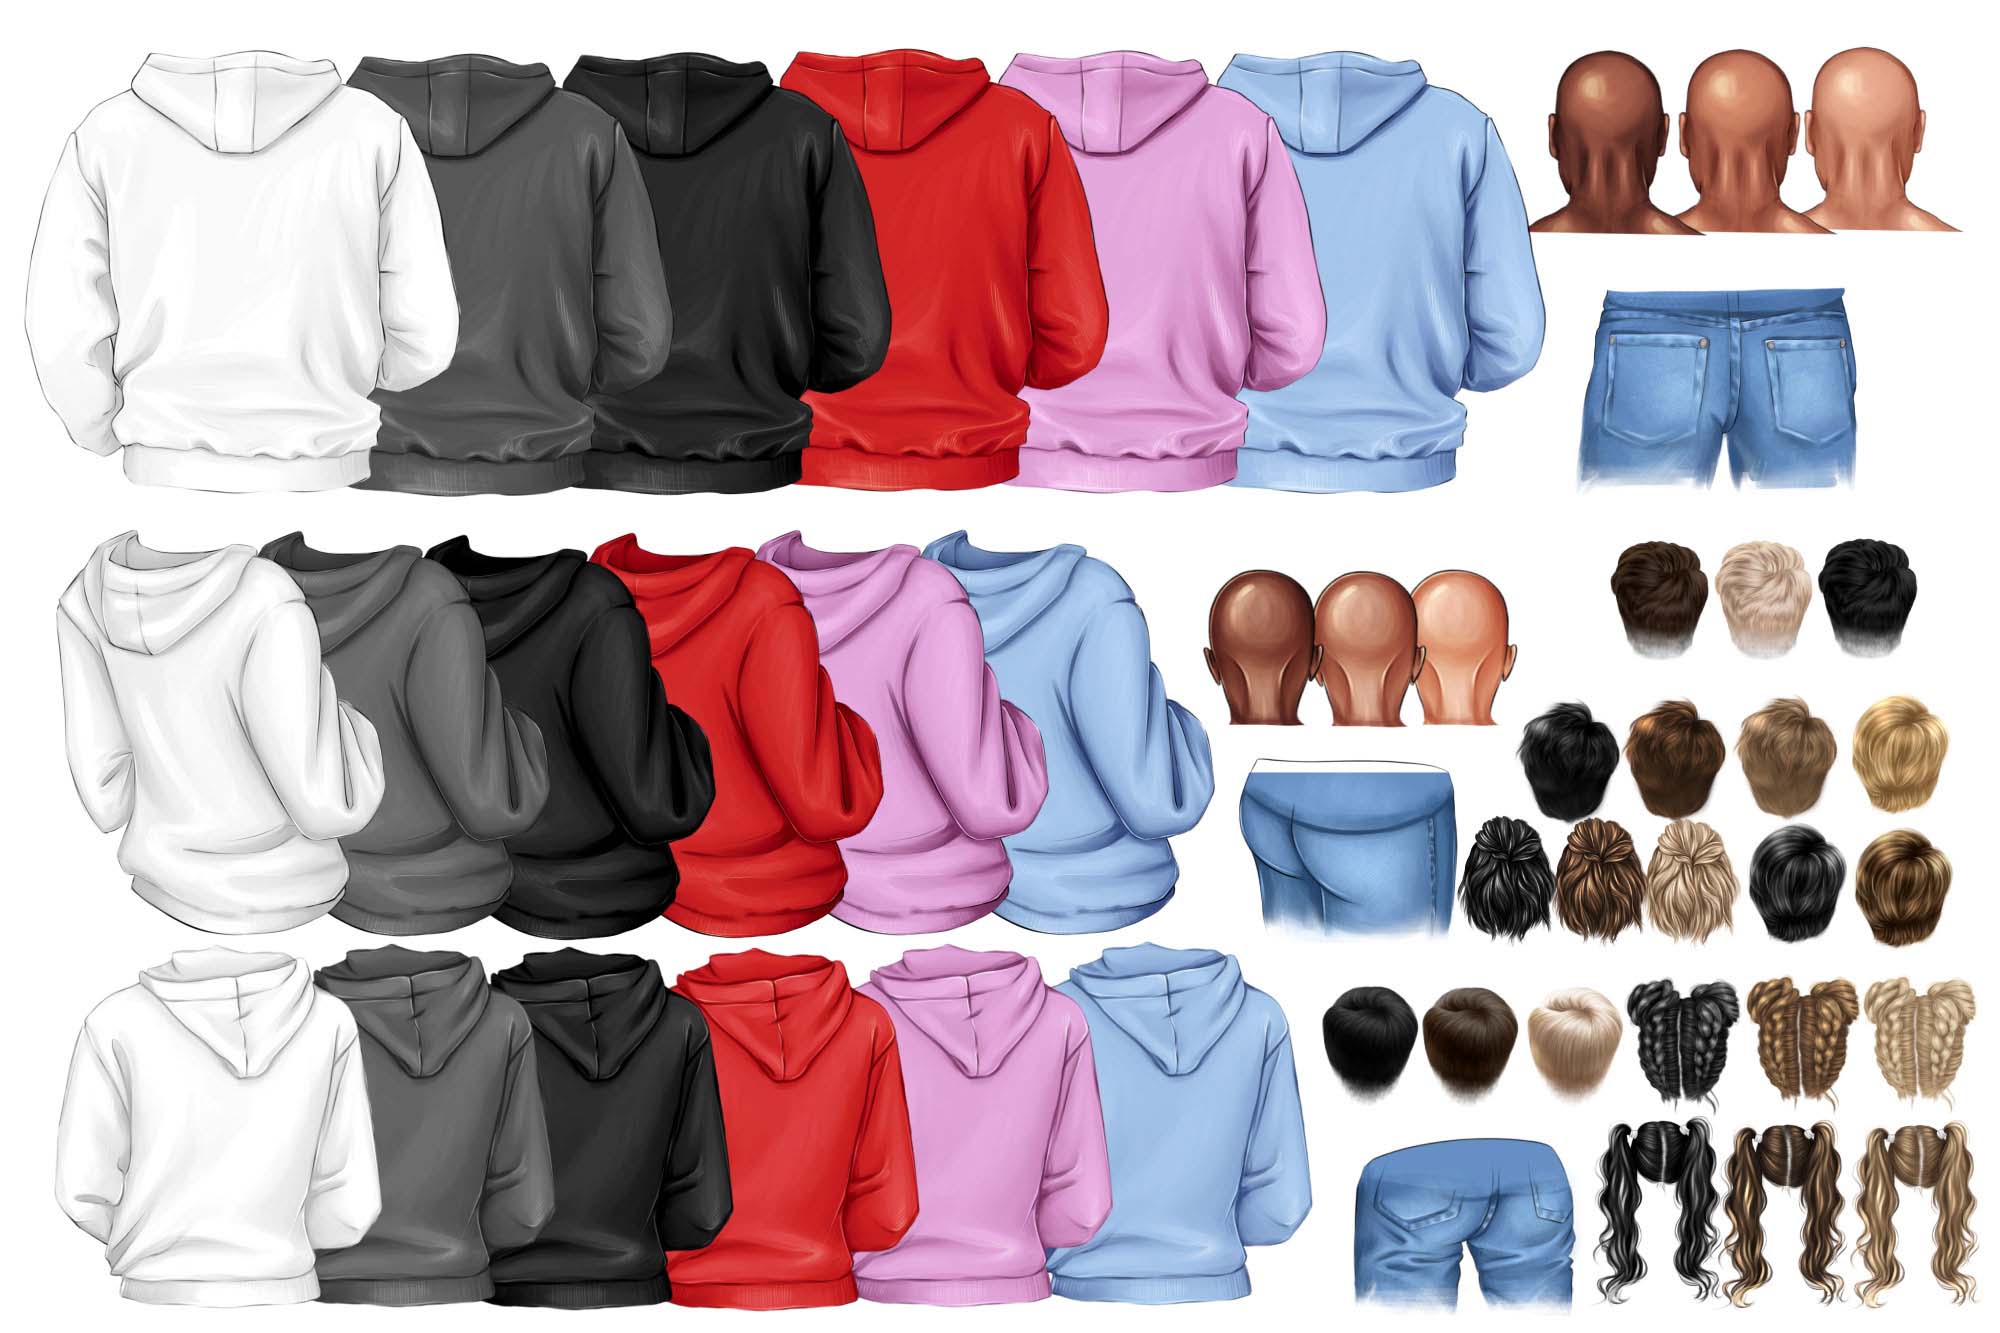 Family Clipart Dad And Kids Clothes Elements.